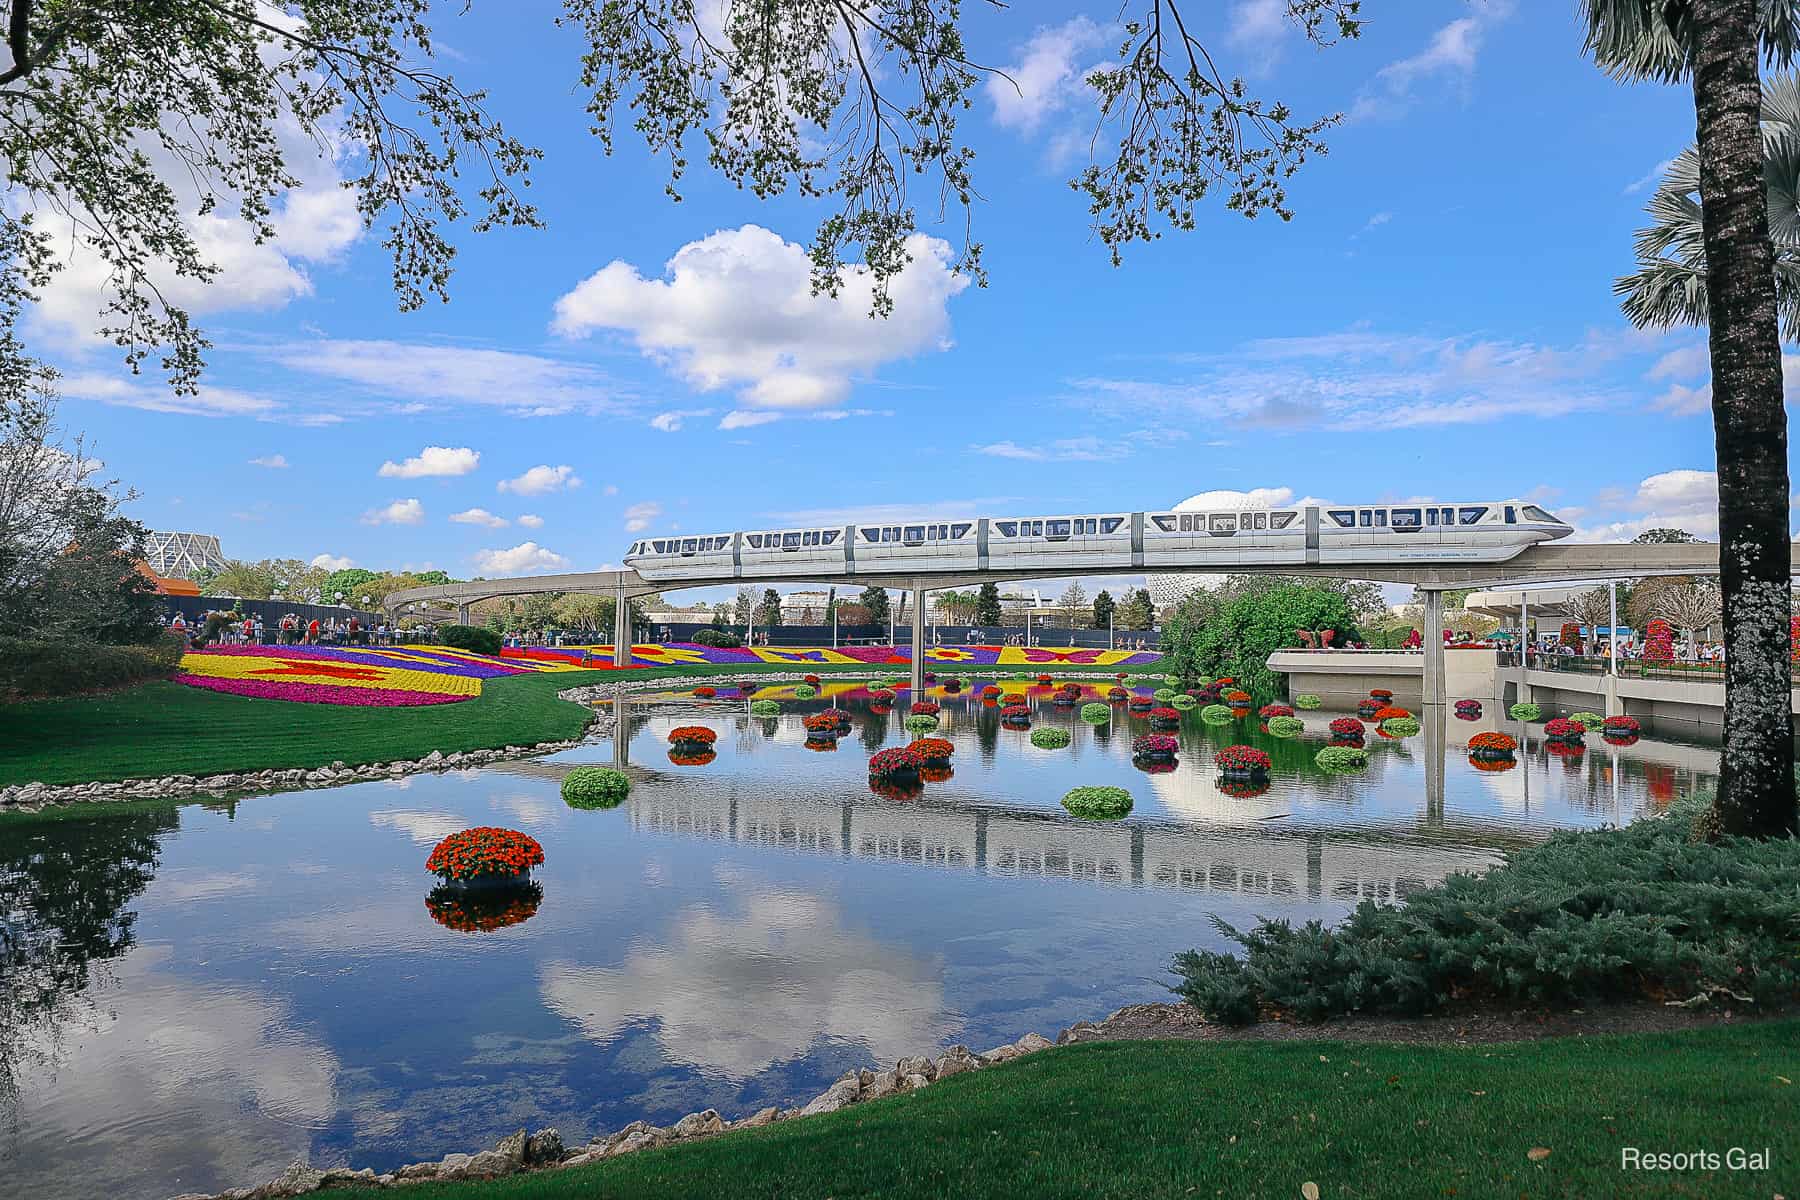 The Disney World monorail with a scenic backdrop at Epcot during the Flower and Garden Festival. 